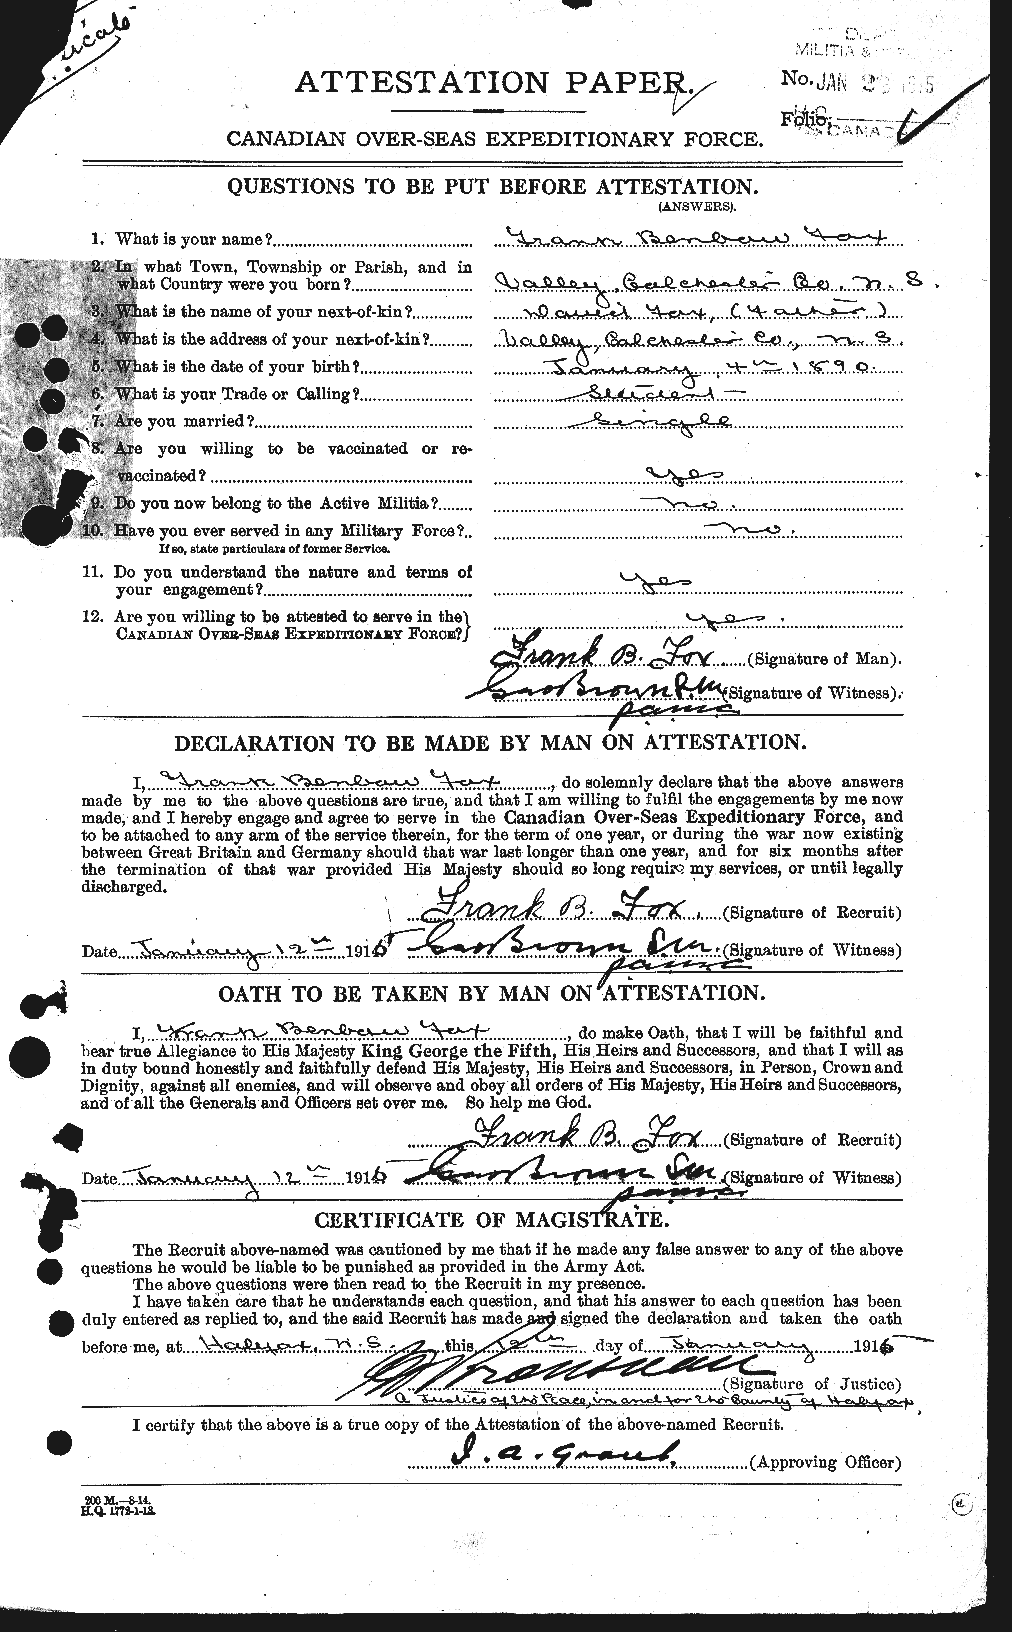 Personnel Records of the First World War - CEF 332456a